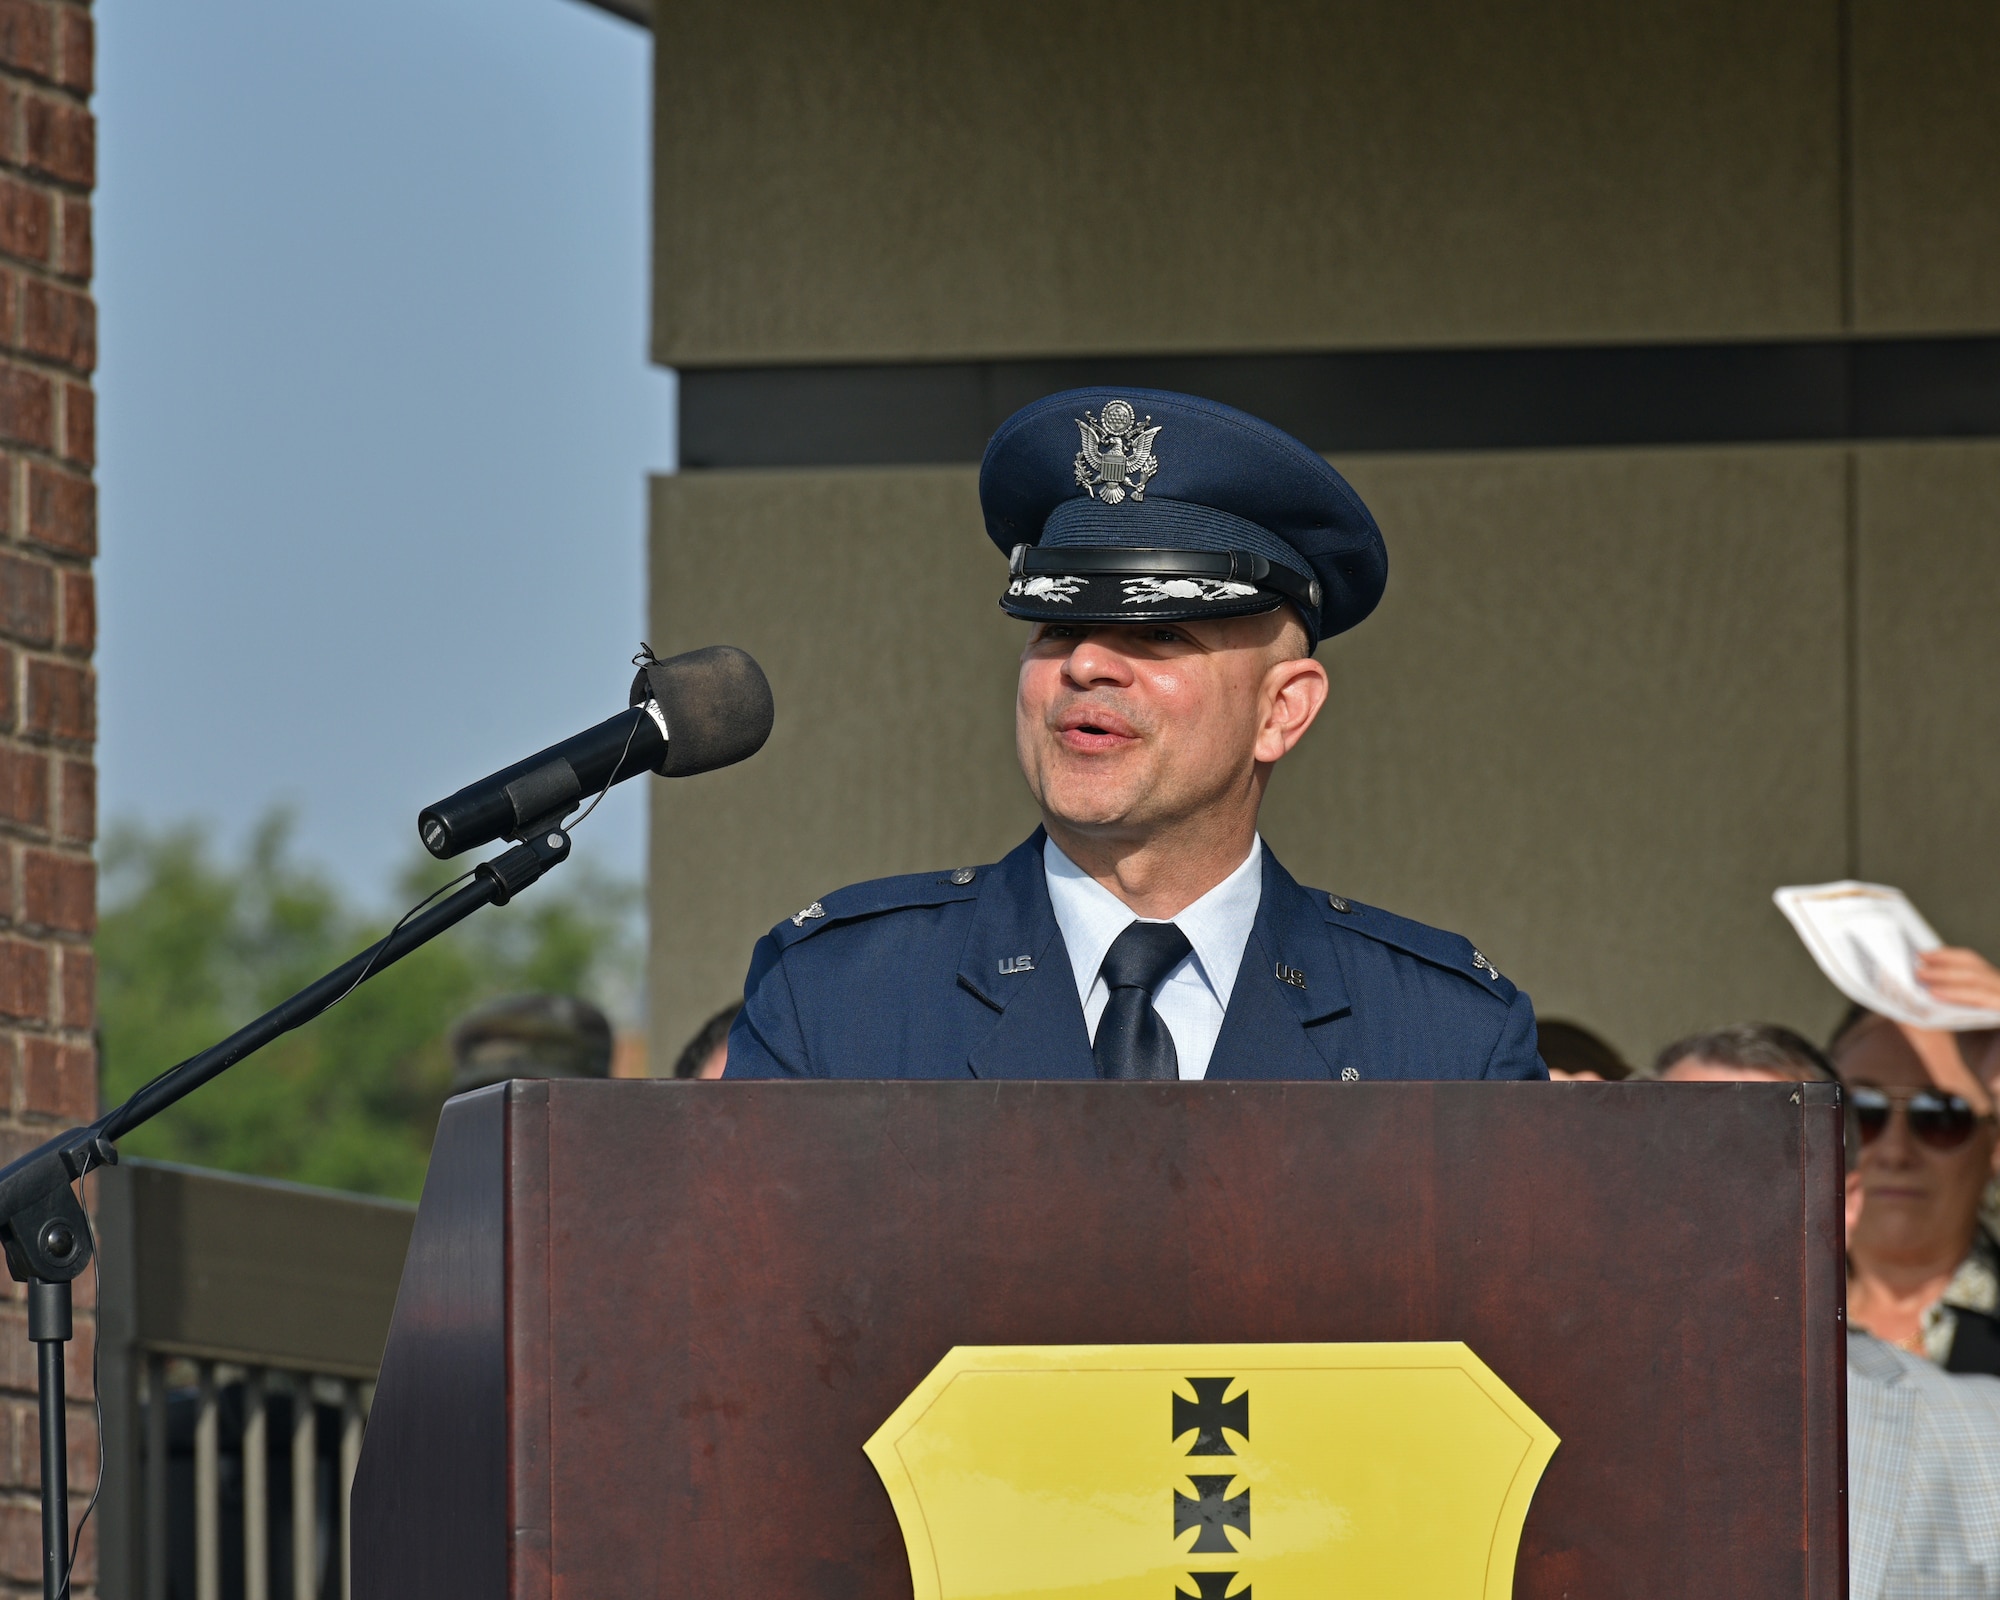 U.S. Air Force Col. Andres Nazario, 17th Training Wing outgoing commander, speaks during the 17th TRW change of command ceremony on Goodfellow Air Force Base, Texas, July 13, 2021. Under Nazario’s command, the 17th TRW earned the Air Force Outstanding Unit Award and expanded partnerships resulting in Goodfellow continuing to hold the highest number of agreements between a military base and the surrounding community Department of Defense wide. (U.S. Air Force photo by Senior Airman Ashley Thrash)